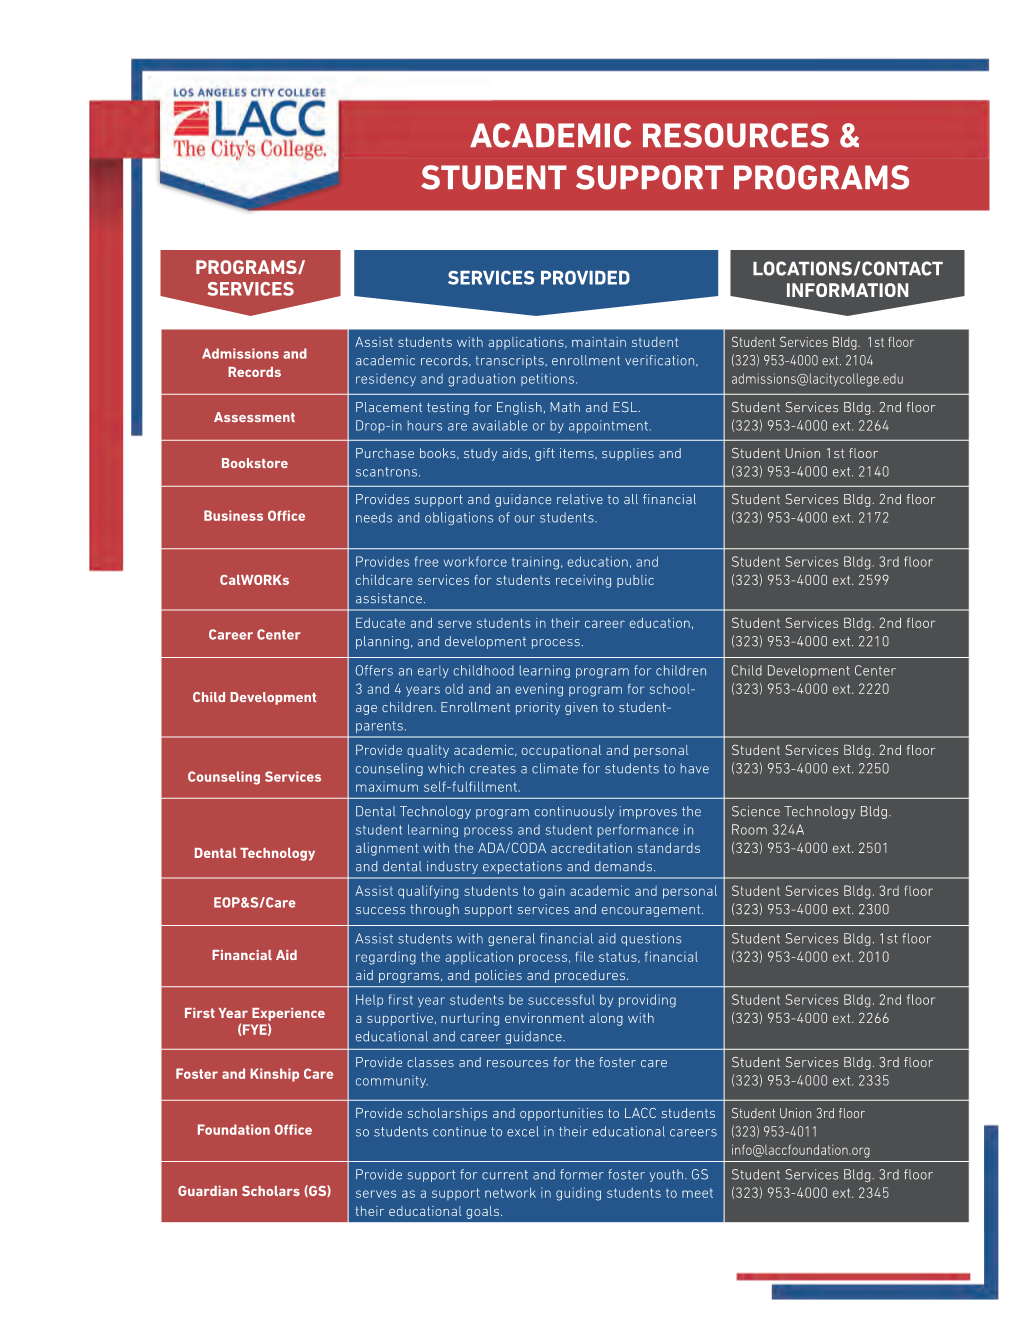 Academic Resources & Student Support Programs